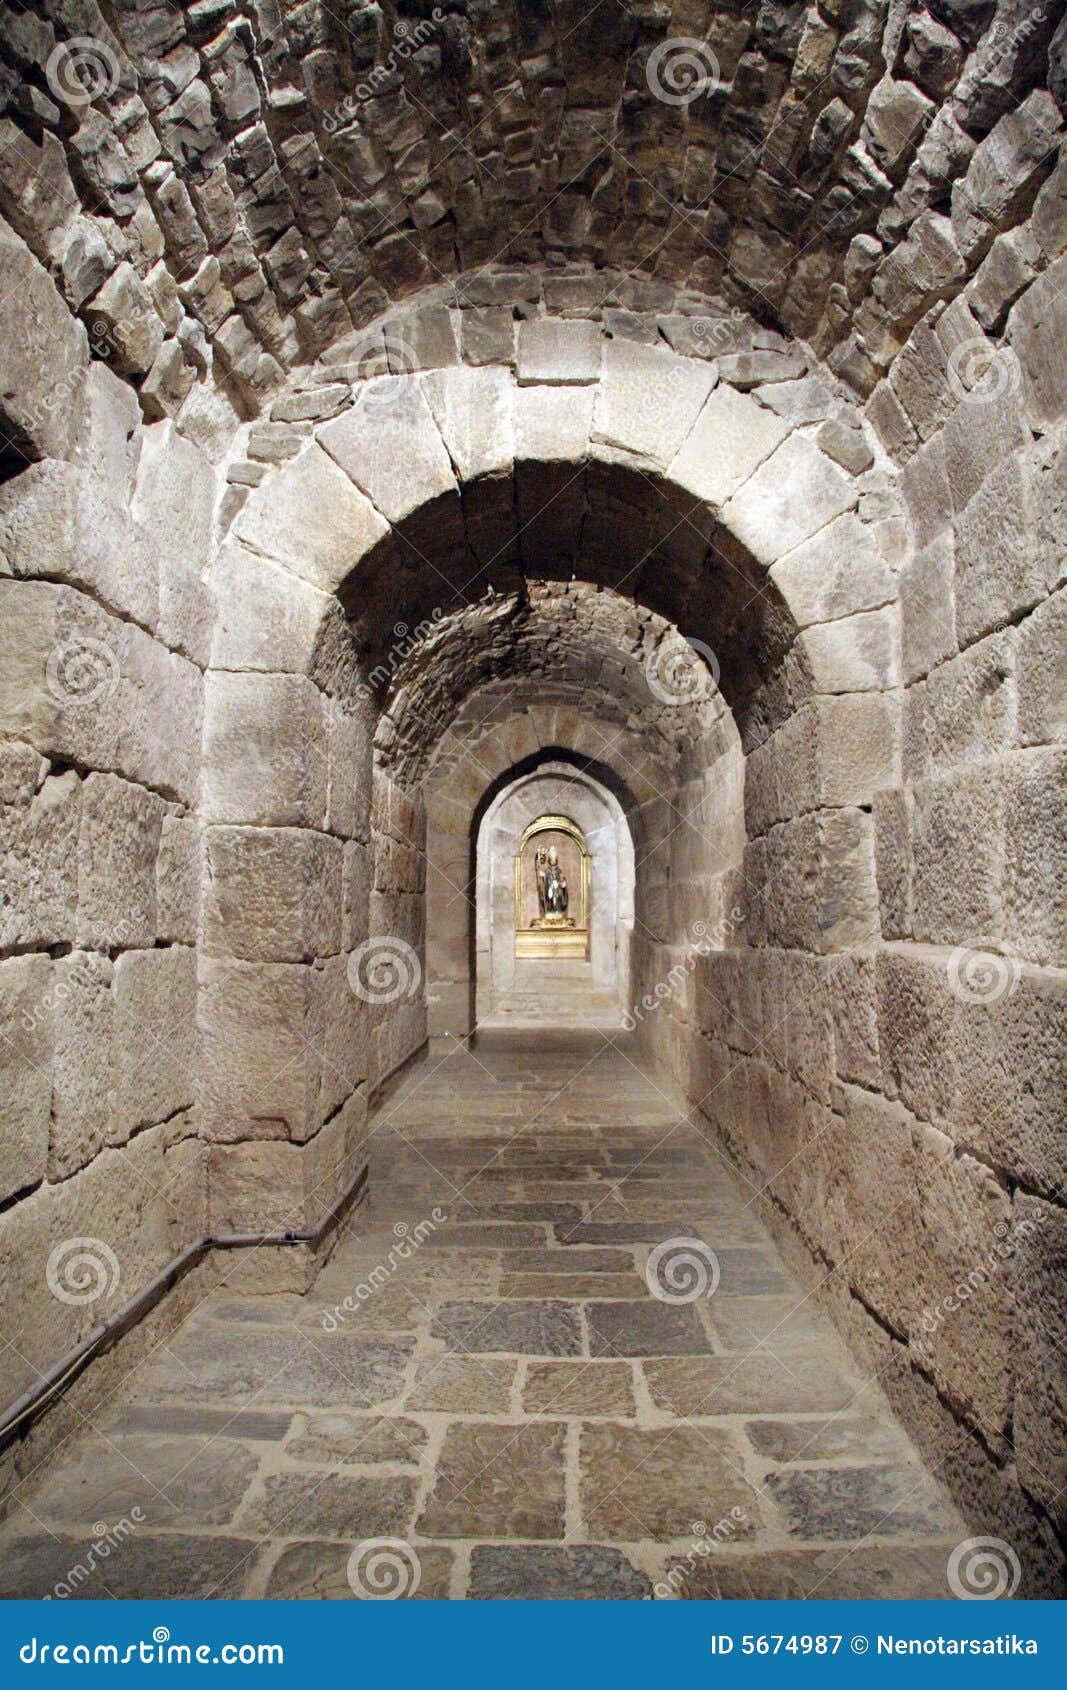 tunel in a crypt